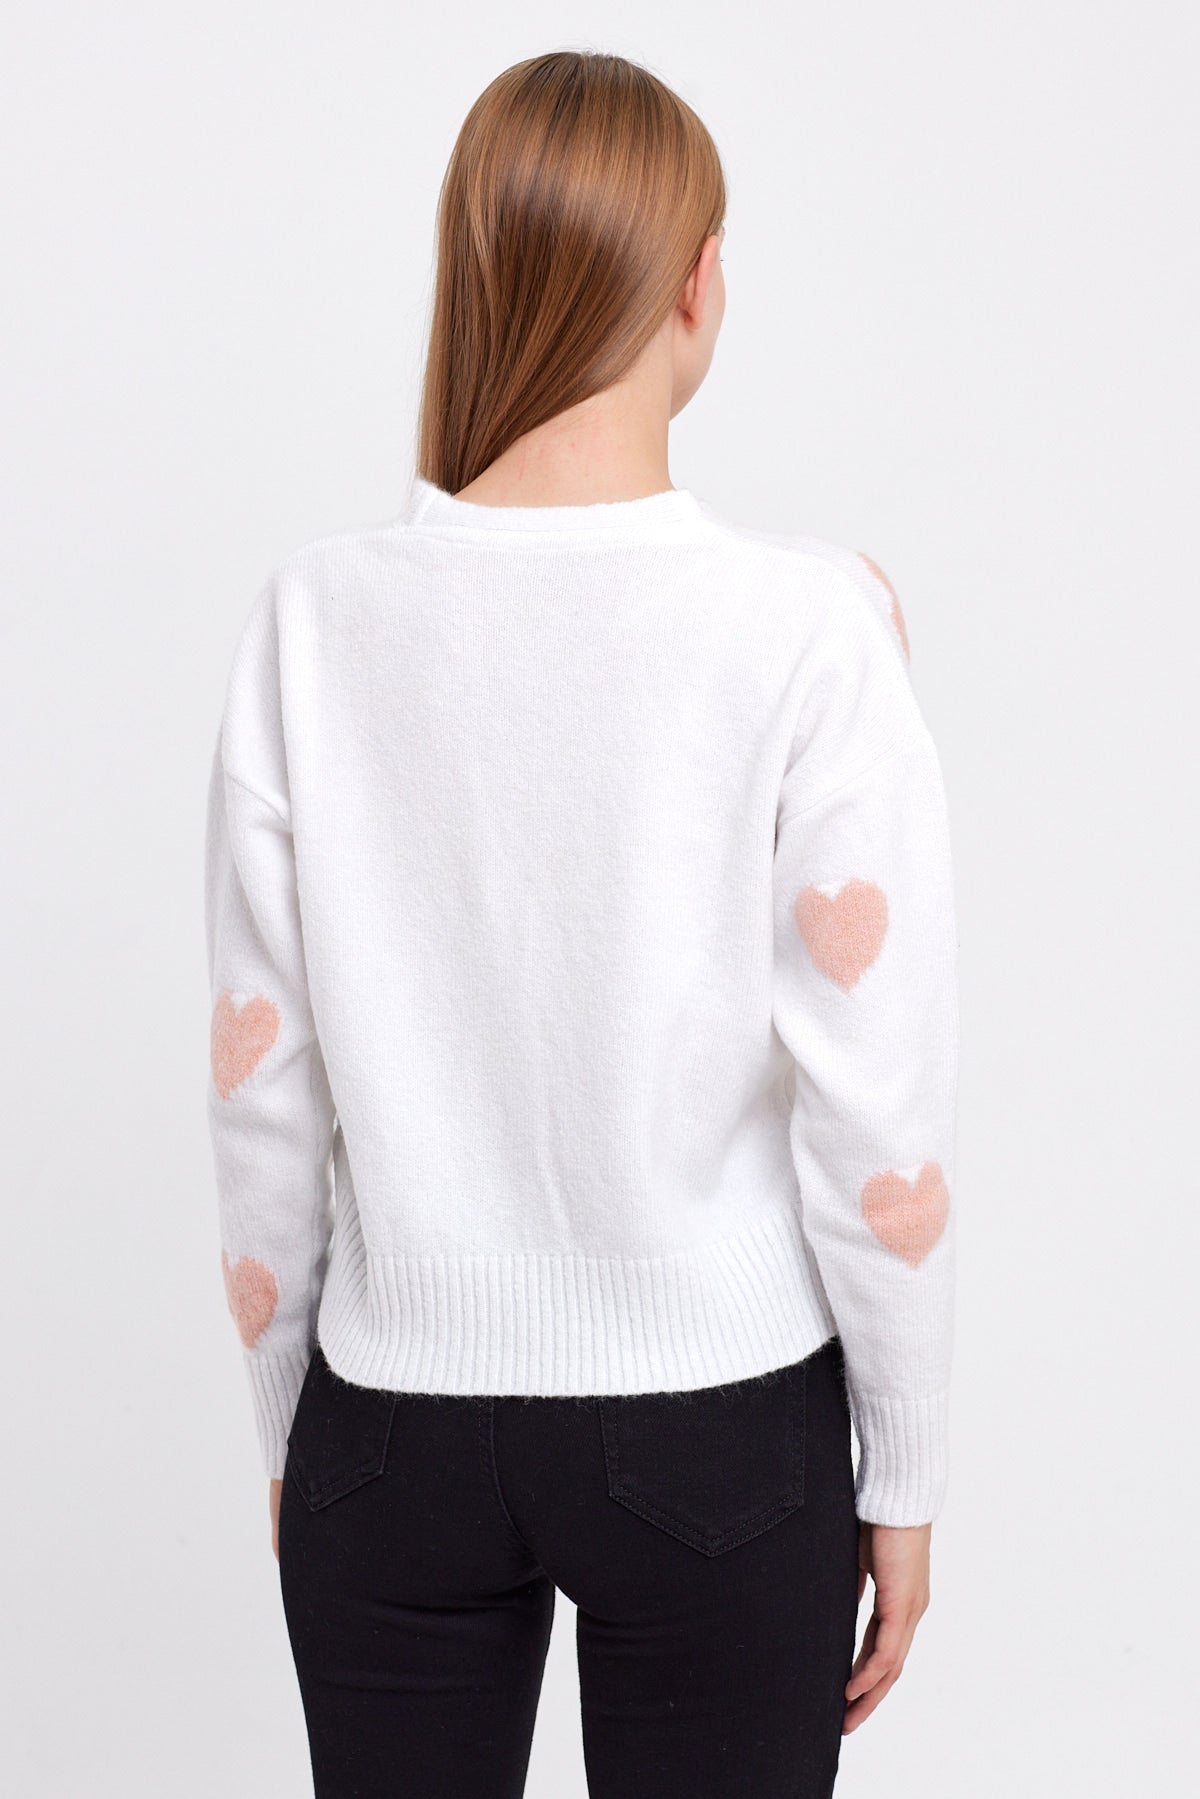 Heart Knit Cardigan Cropped - One Size (Fits S-M-L)